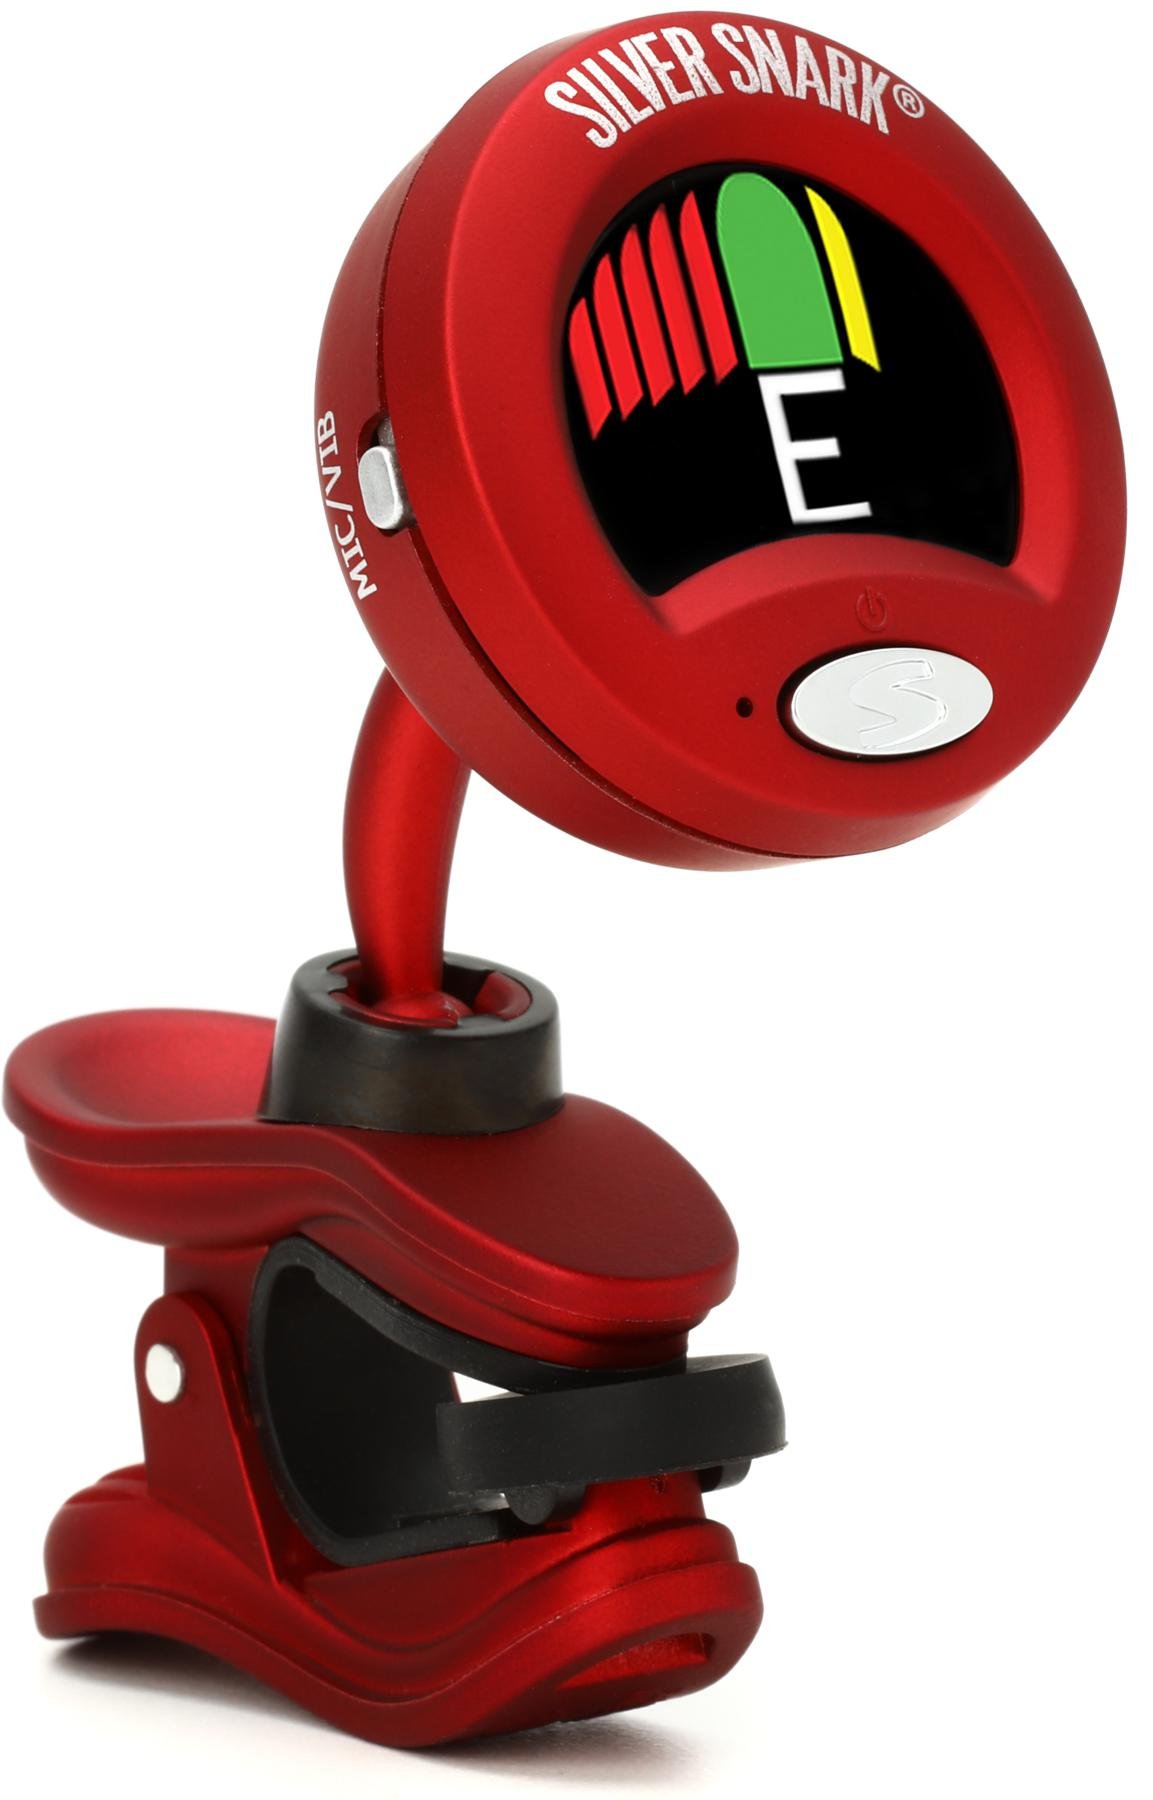 Snark Silver Snark Chromatic Tuner - Red | Sweetwater